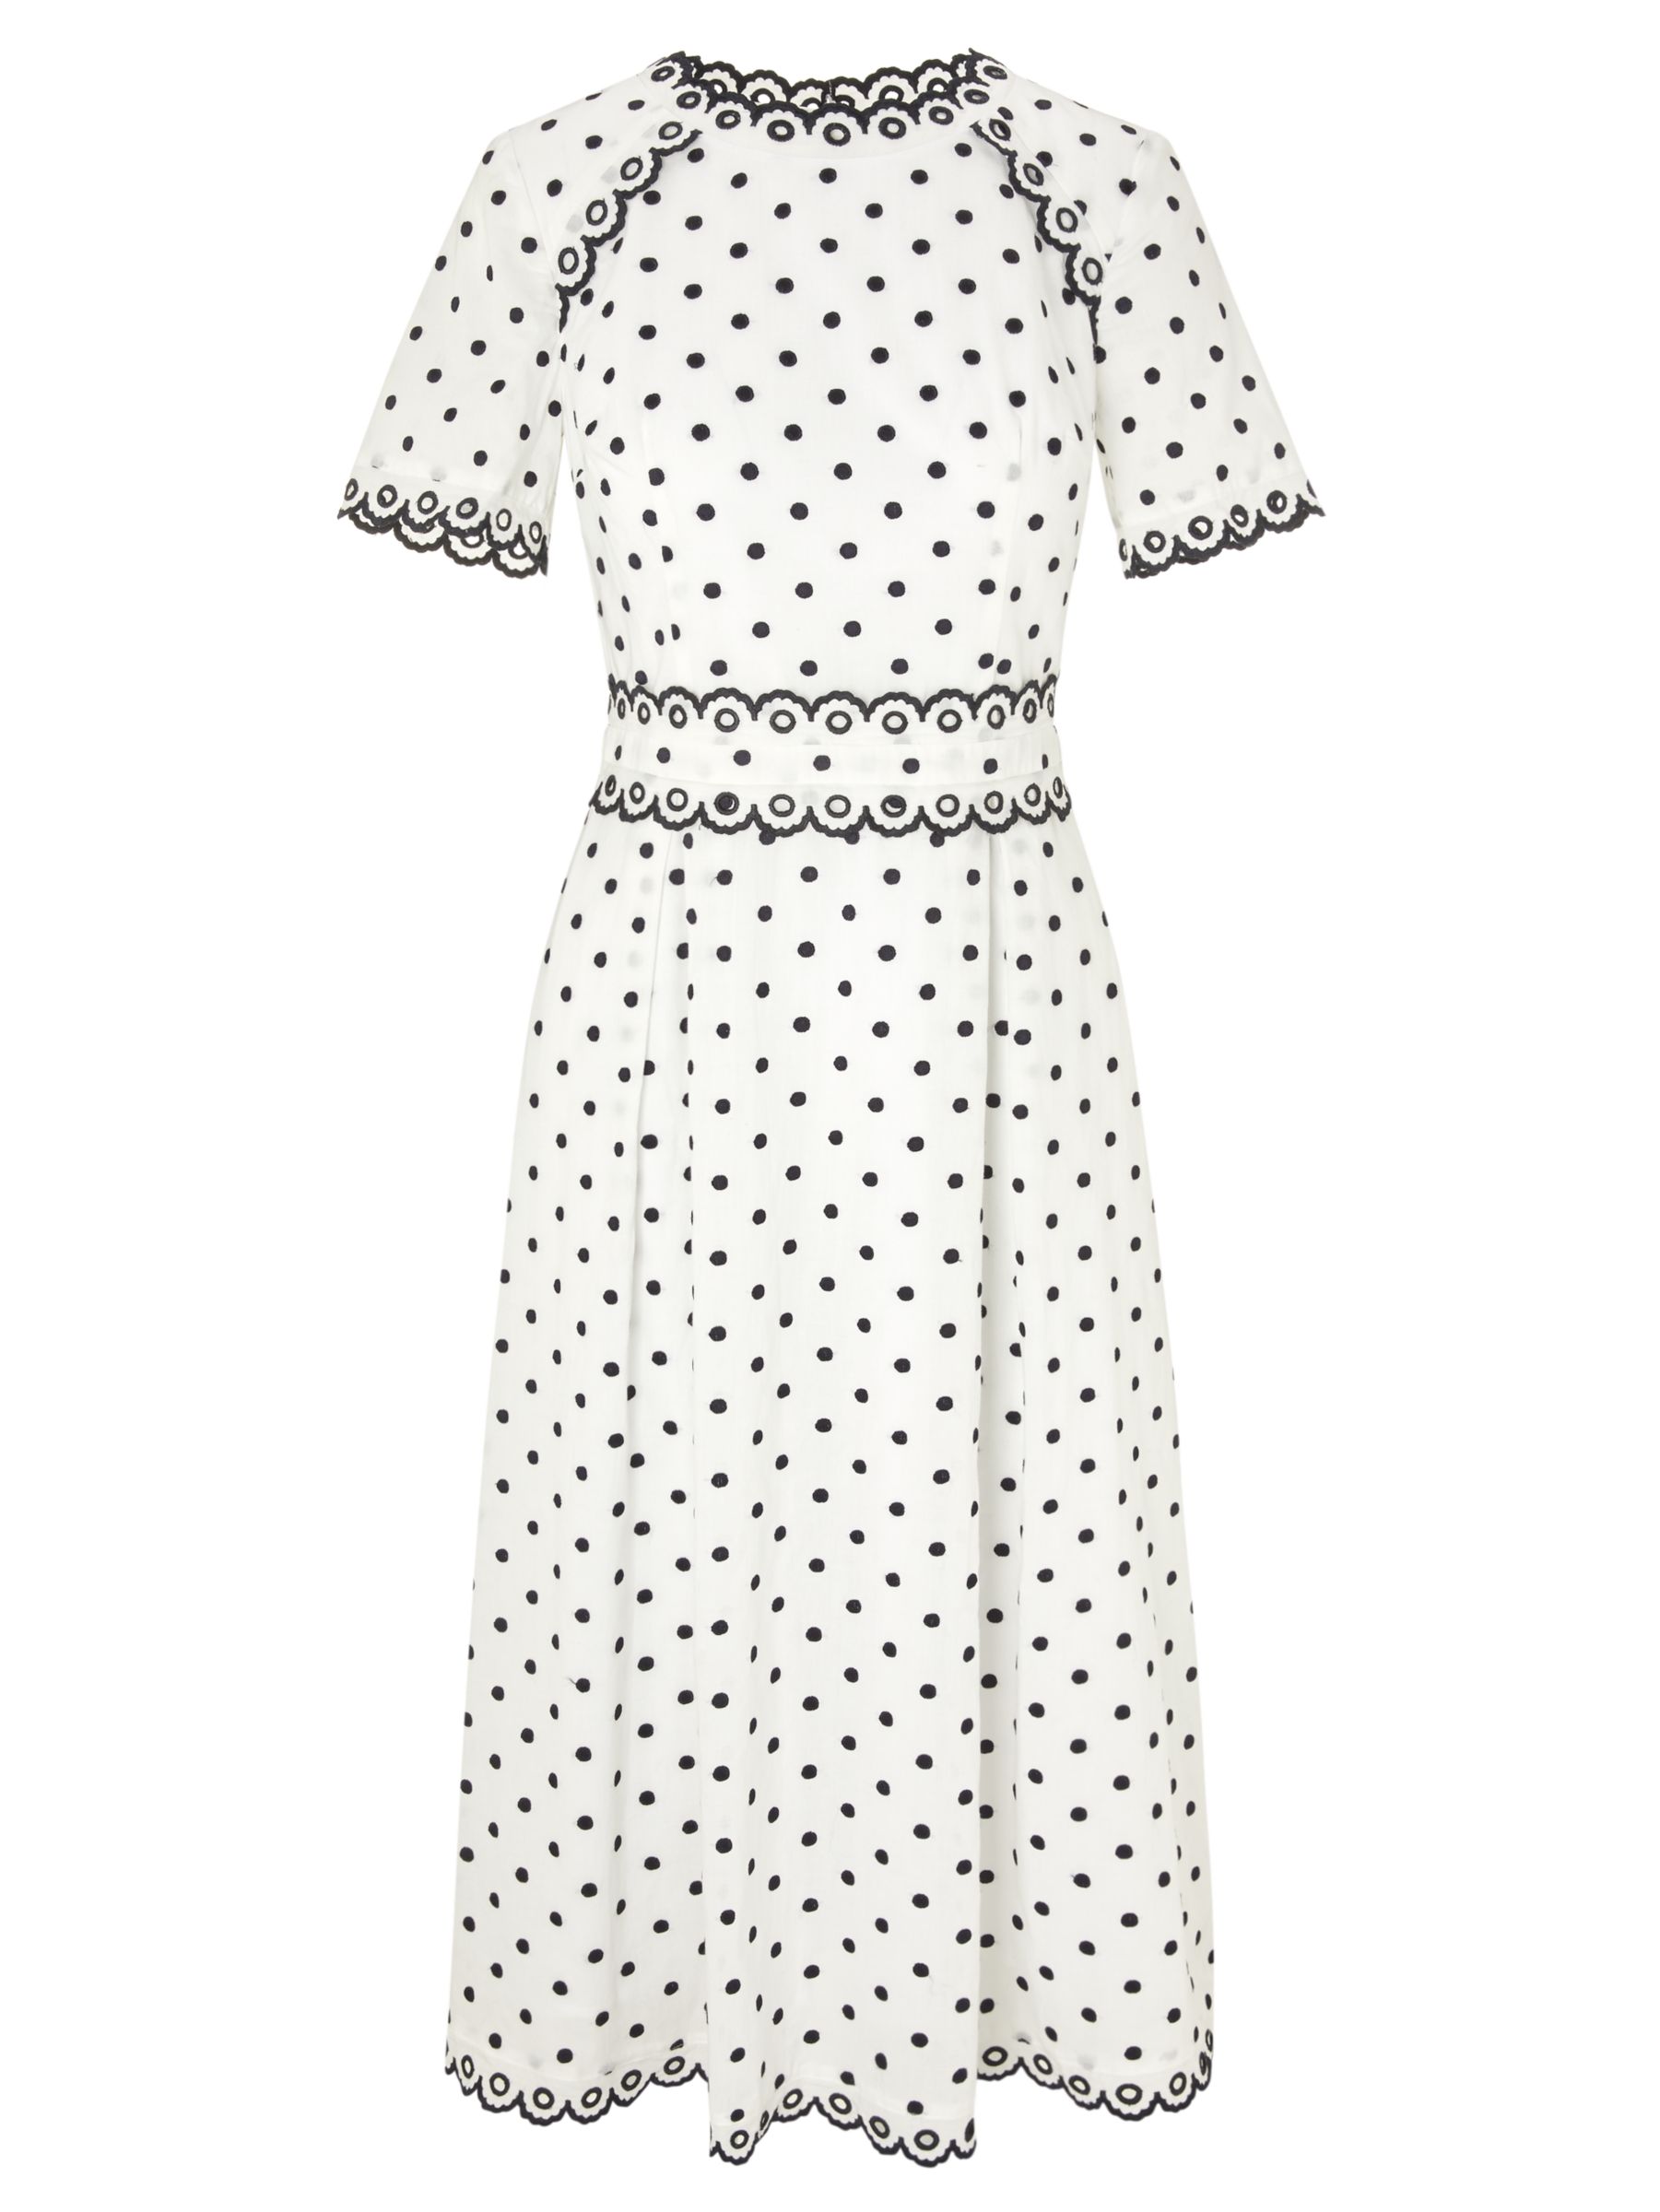 Boden Kimberly Embroidered Dress, Ivory/French Navy Spot